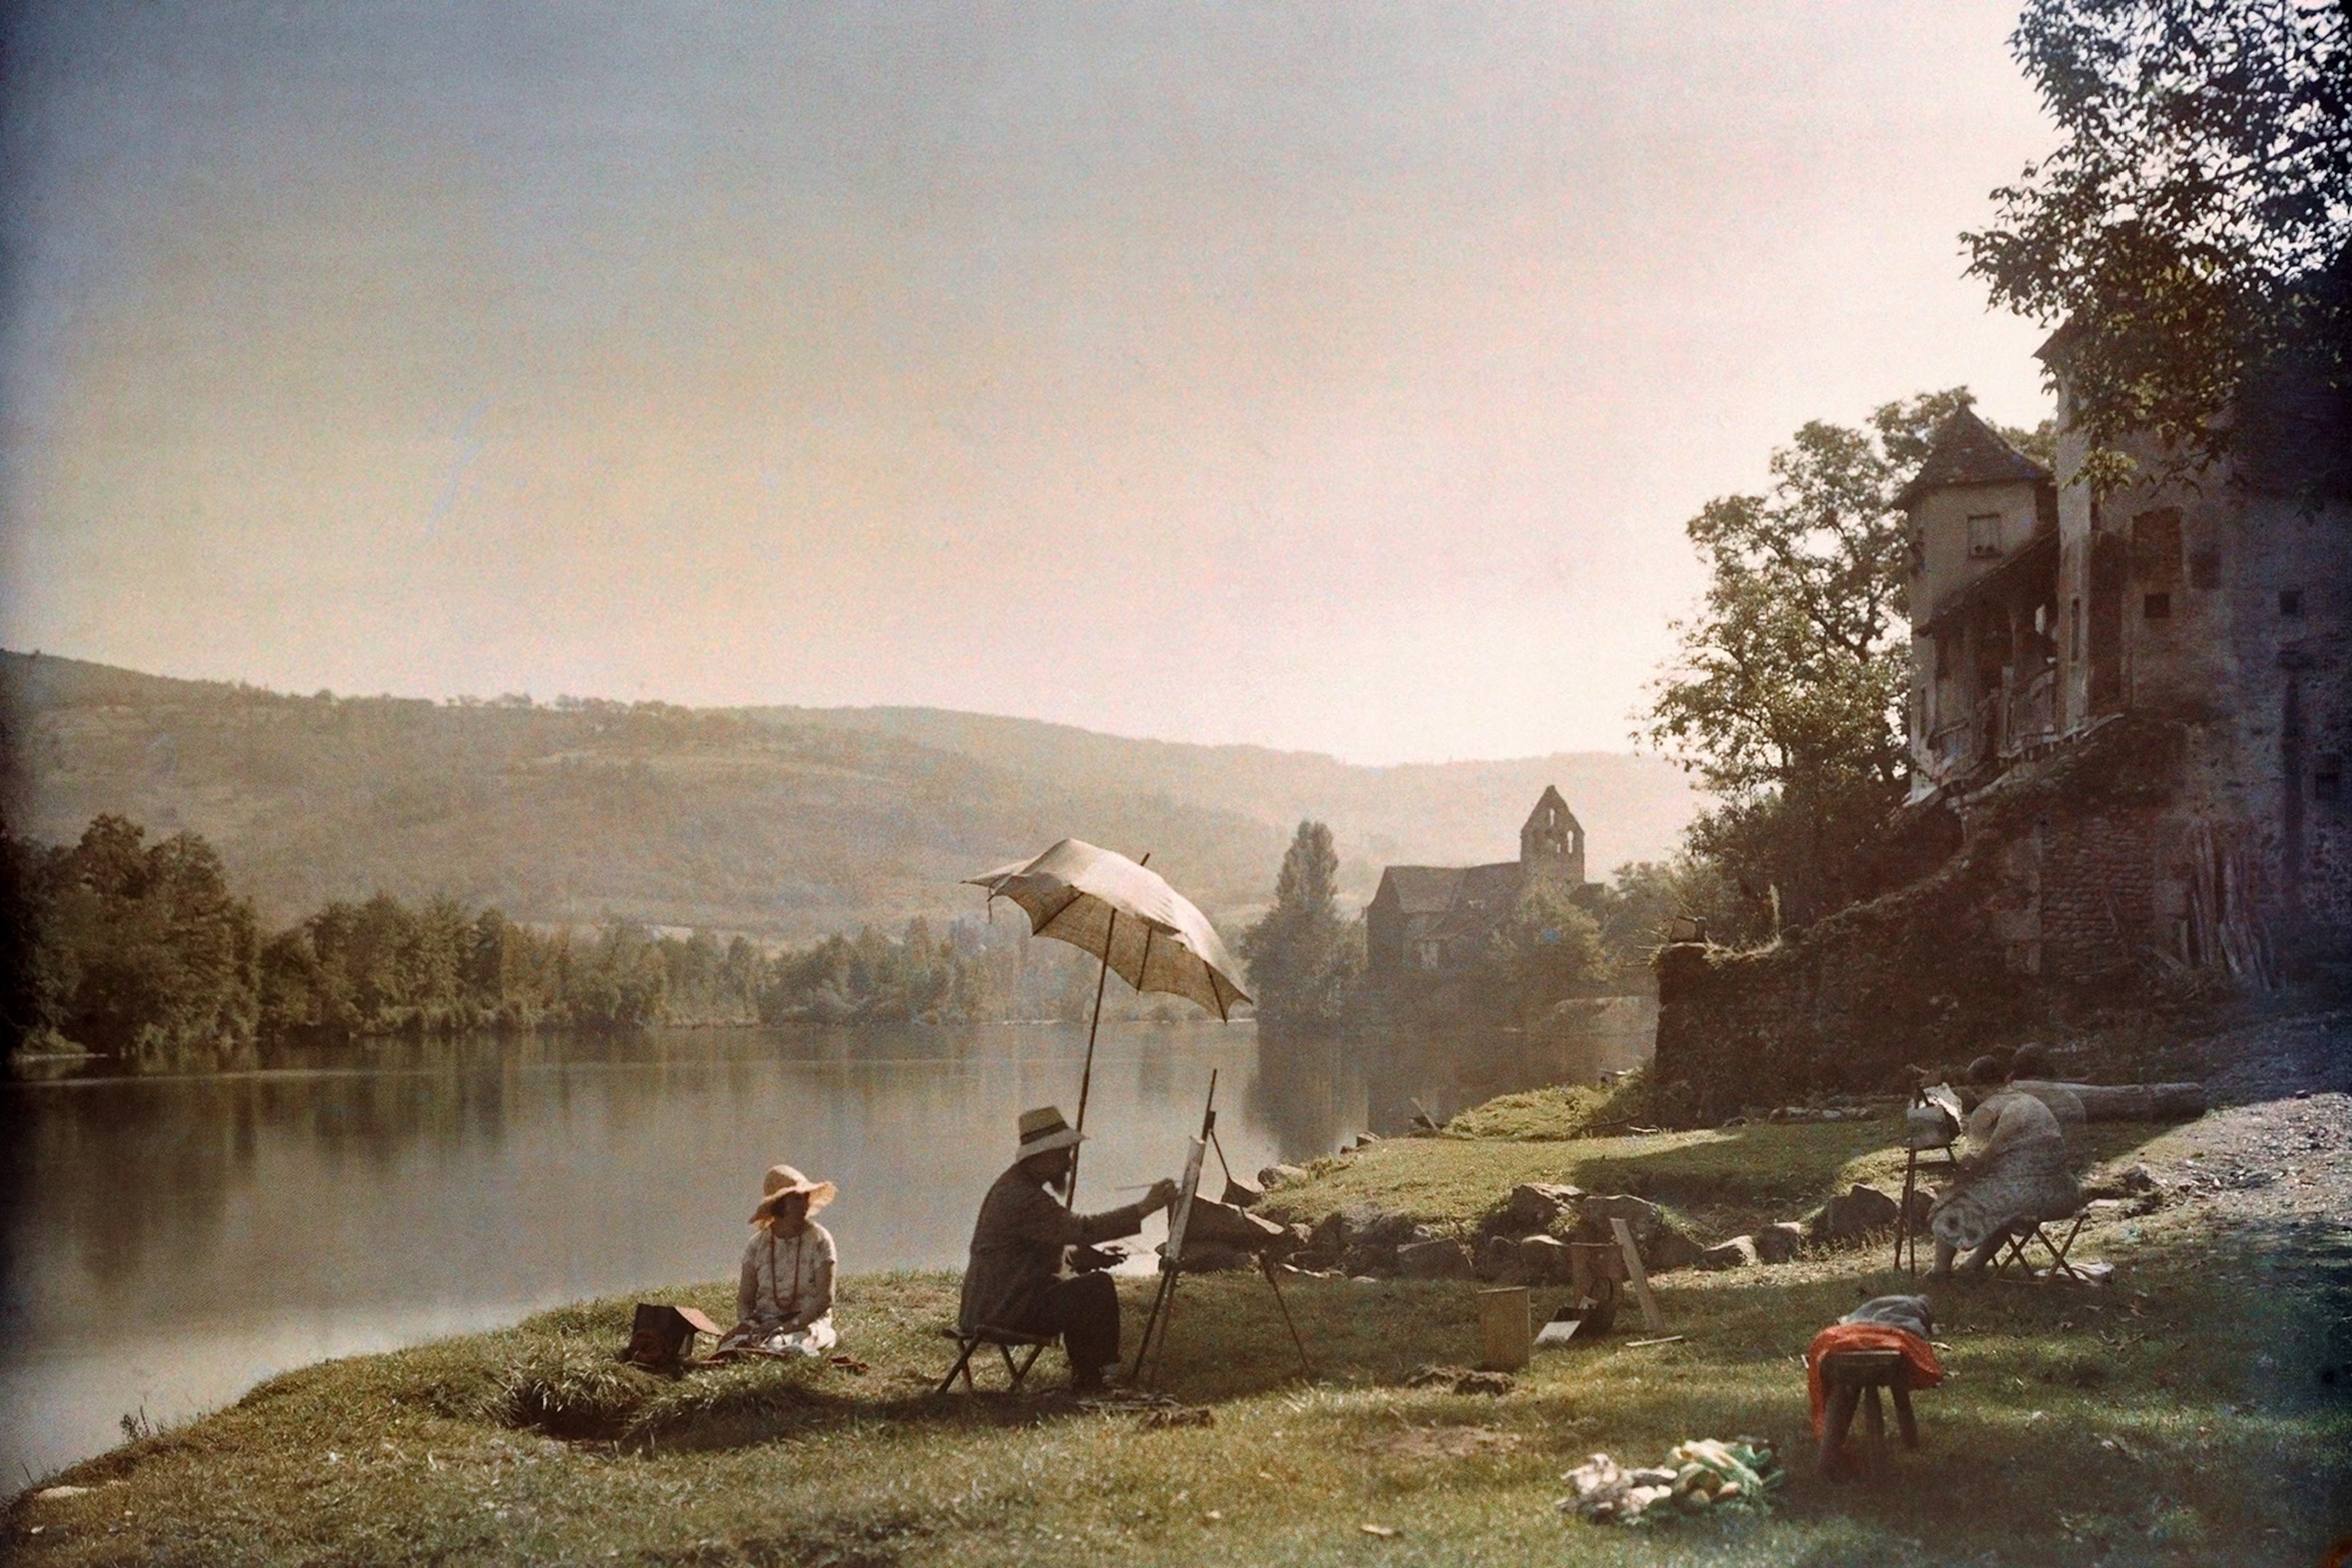 Autochrome photograph of an artist painting and two women by the Dordogne River, France, 1925.JPG